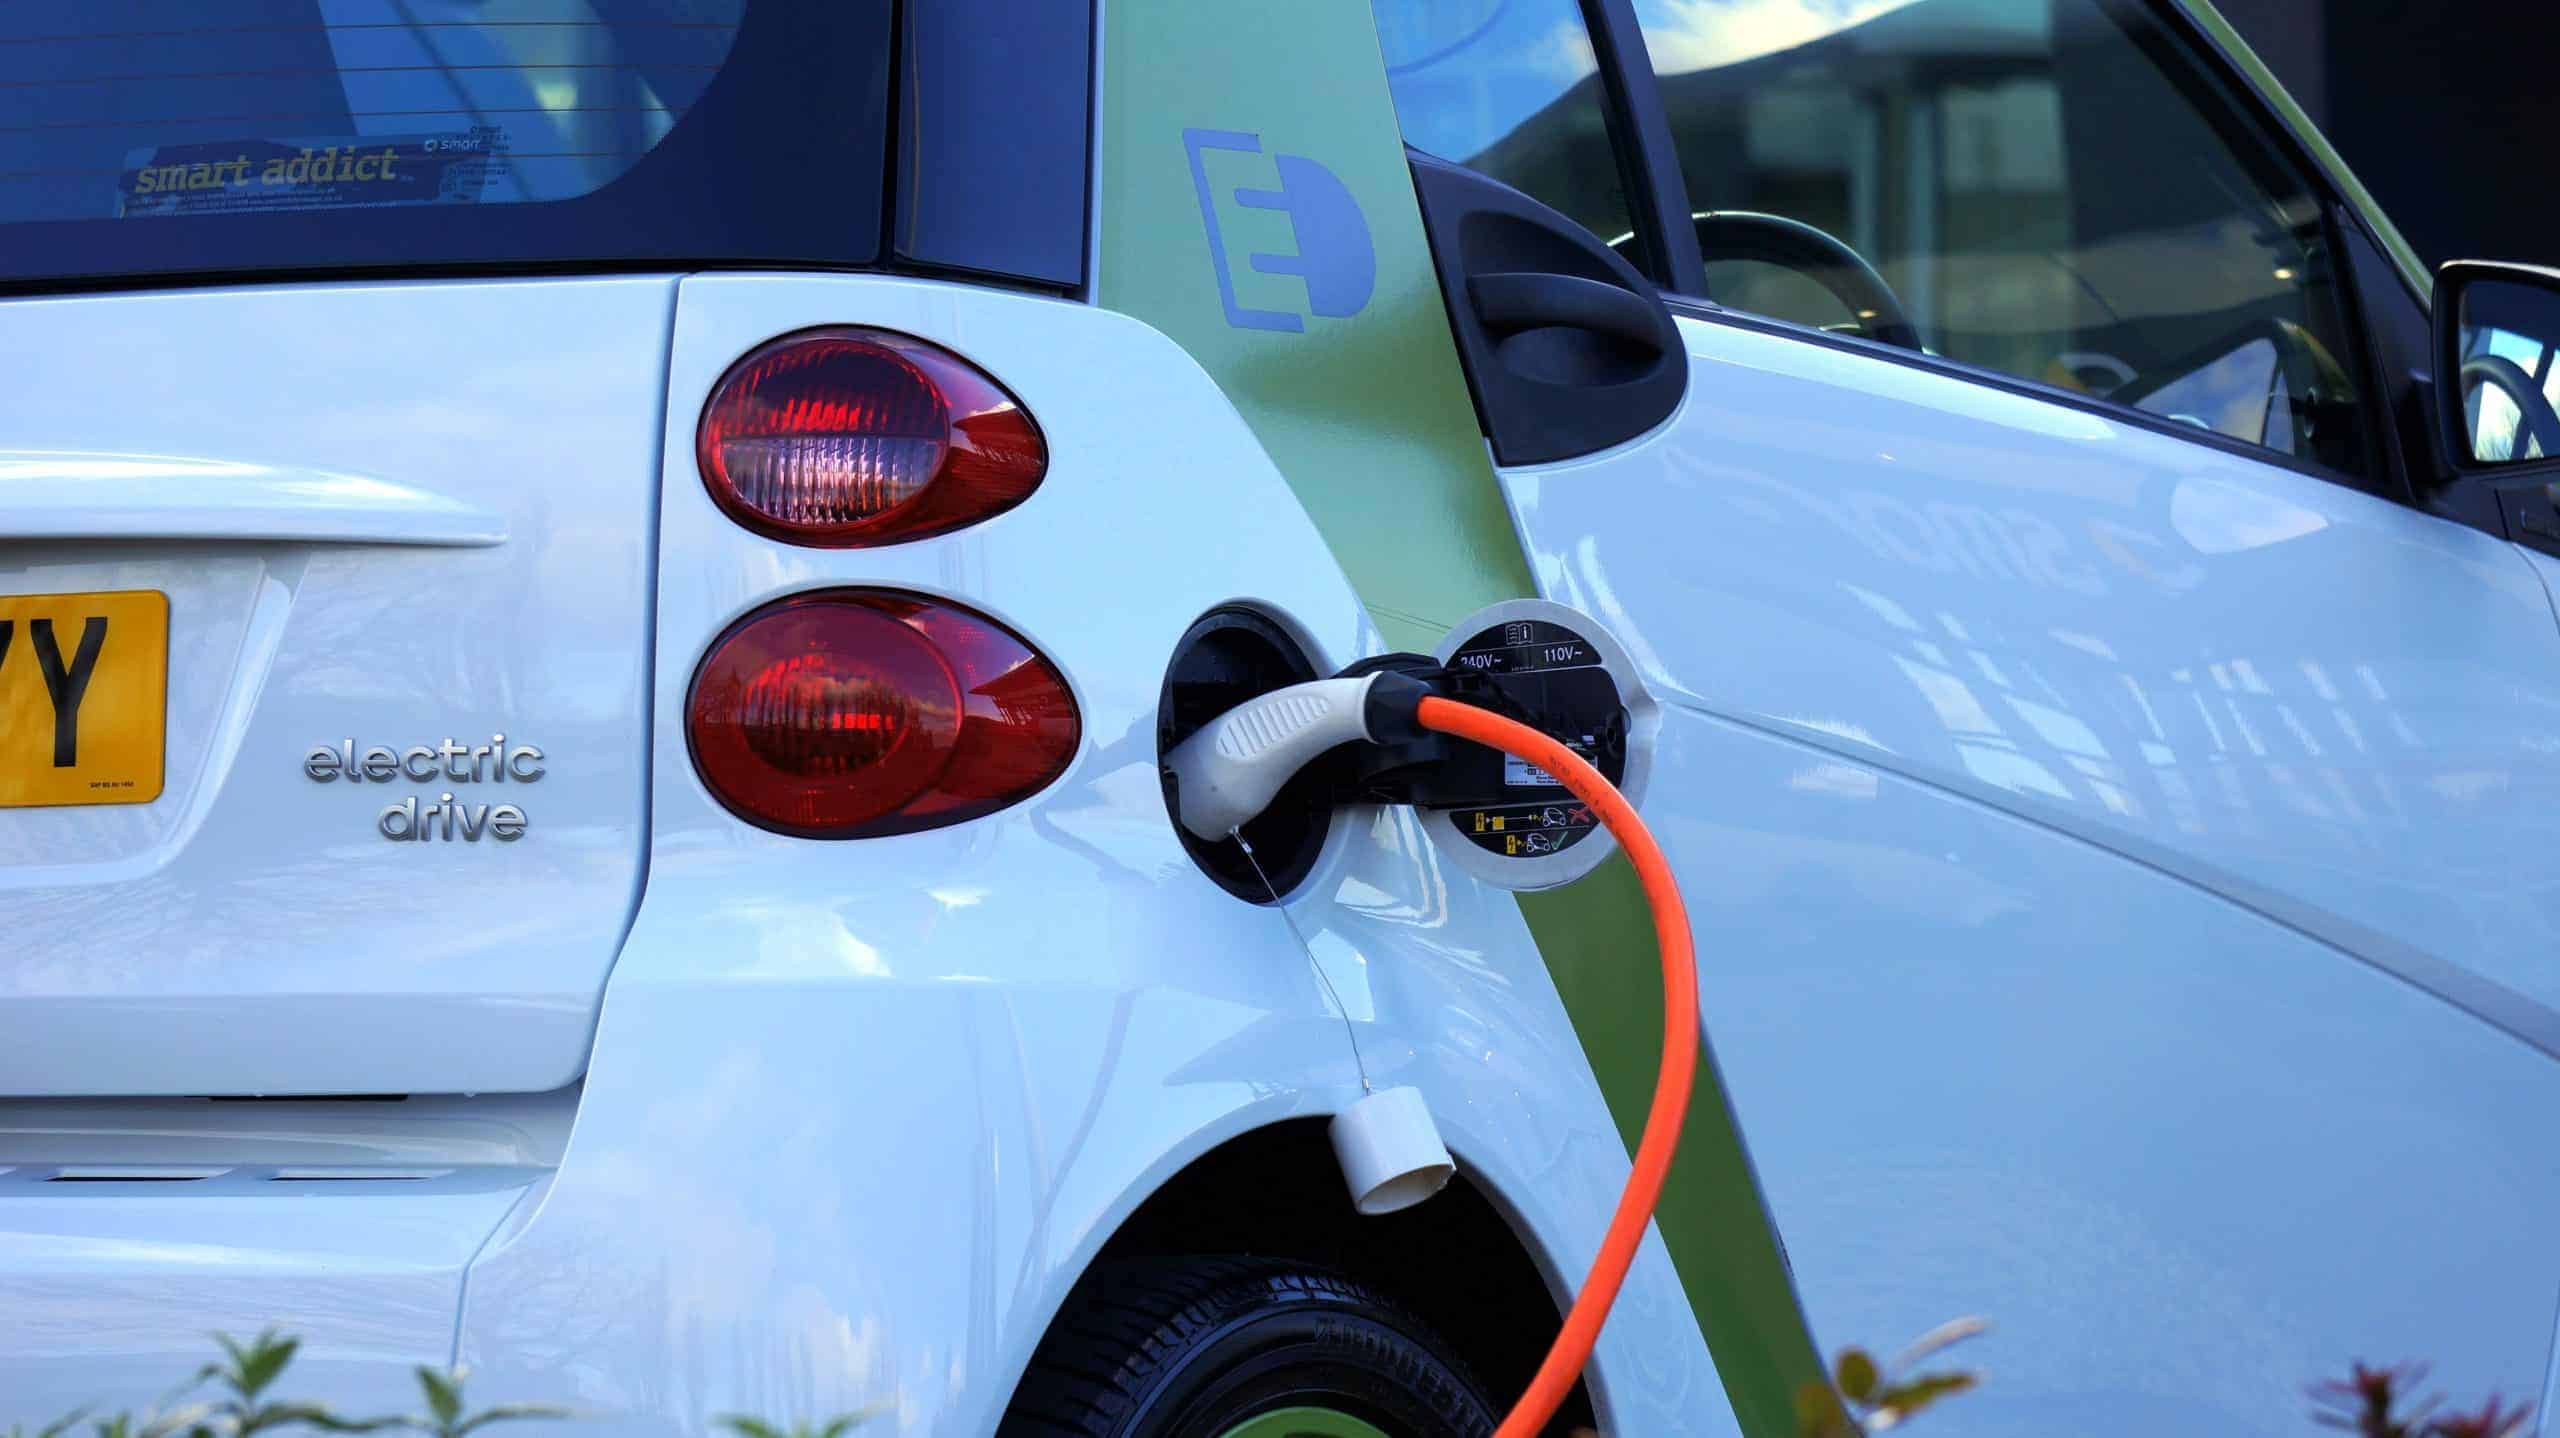 Electric cars – a fad or the future of motoring?